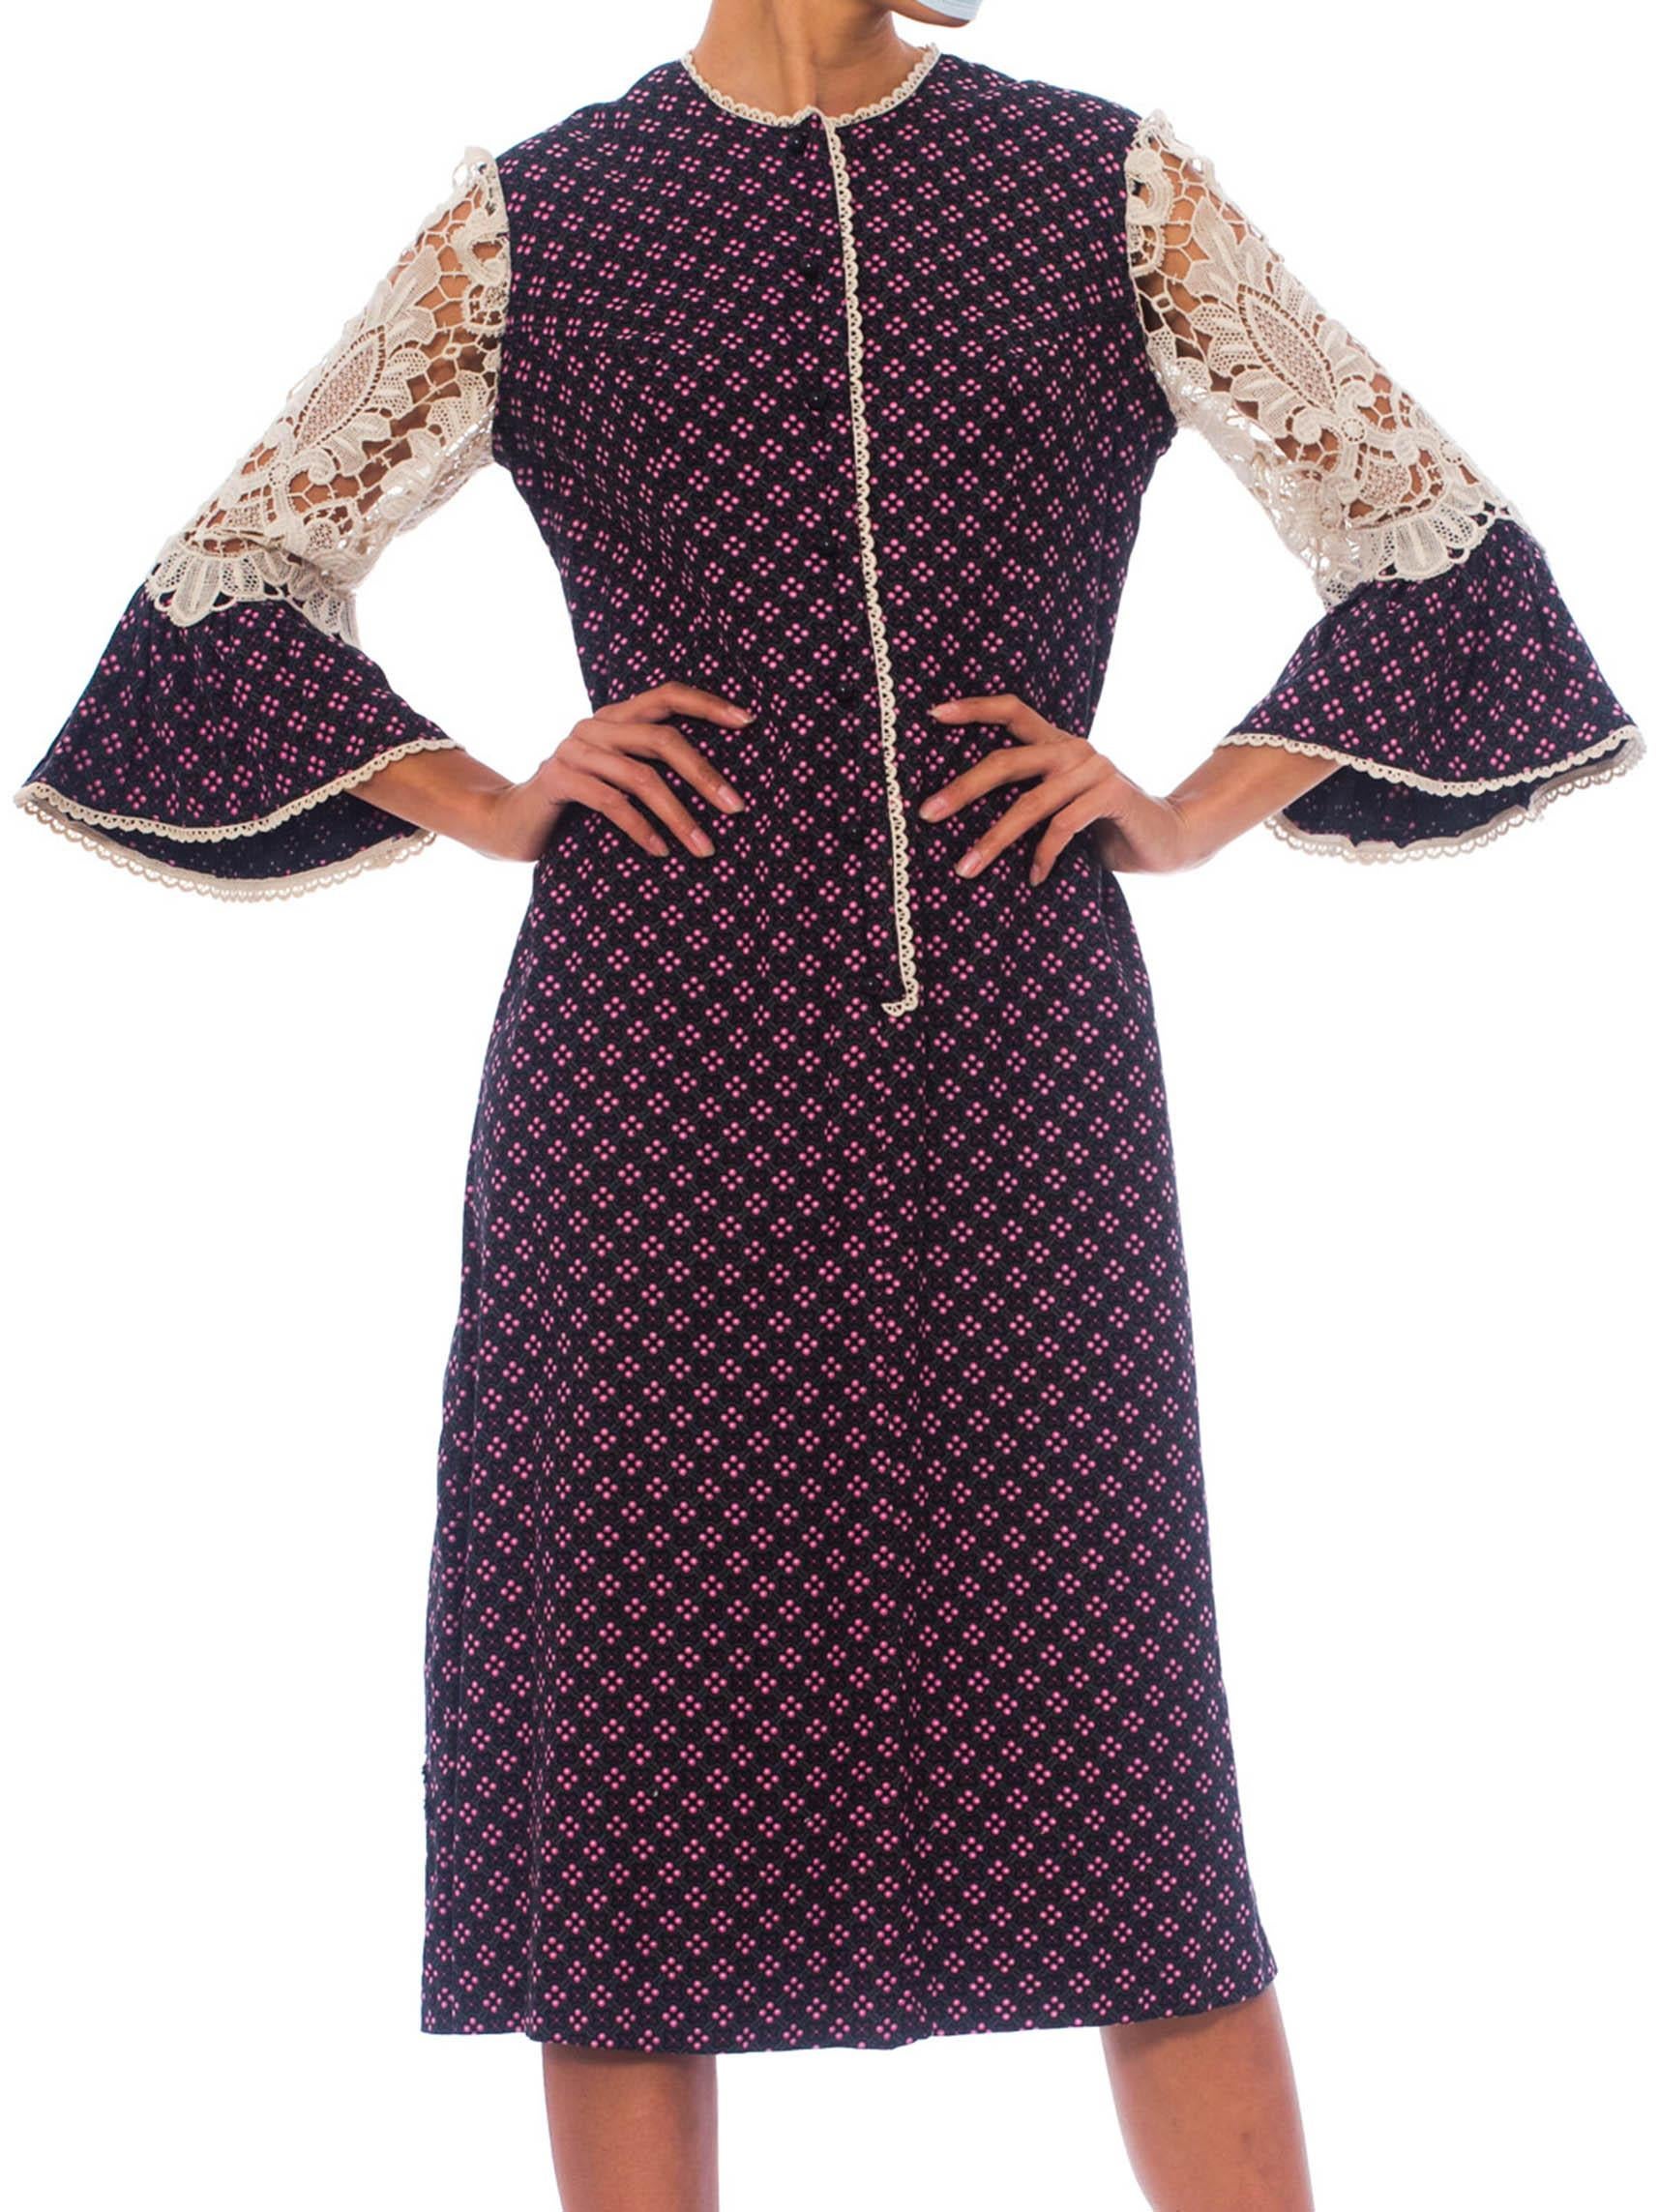 Women's 1960S Floral Printed Cotton Twill Victorian Revival Dress With White Lace Sleev For Sale